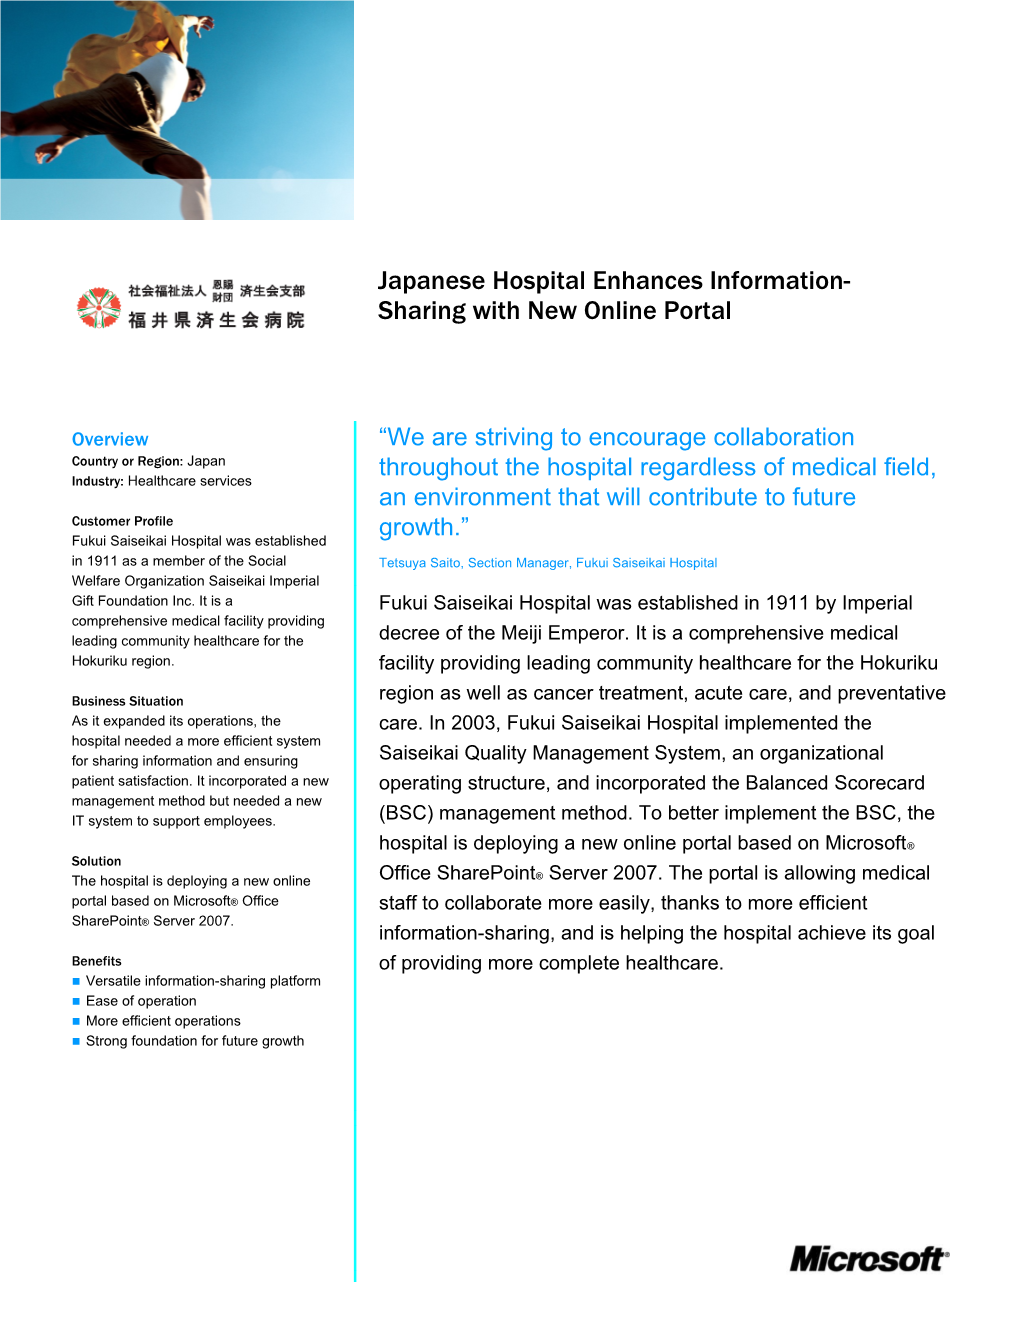 Hospital Enhances Information-Sharing with New Online Portal